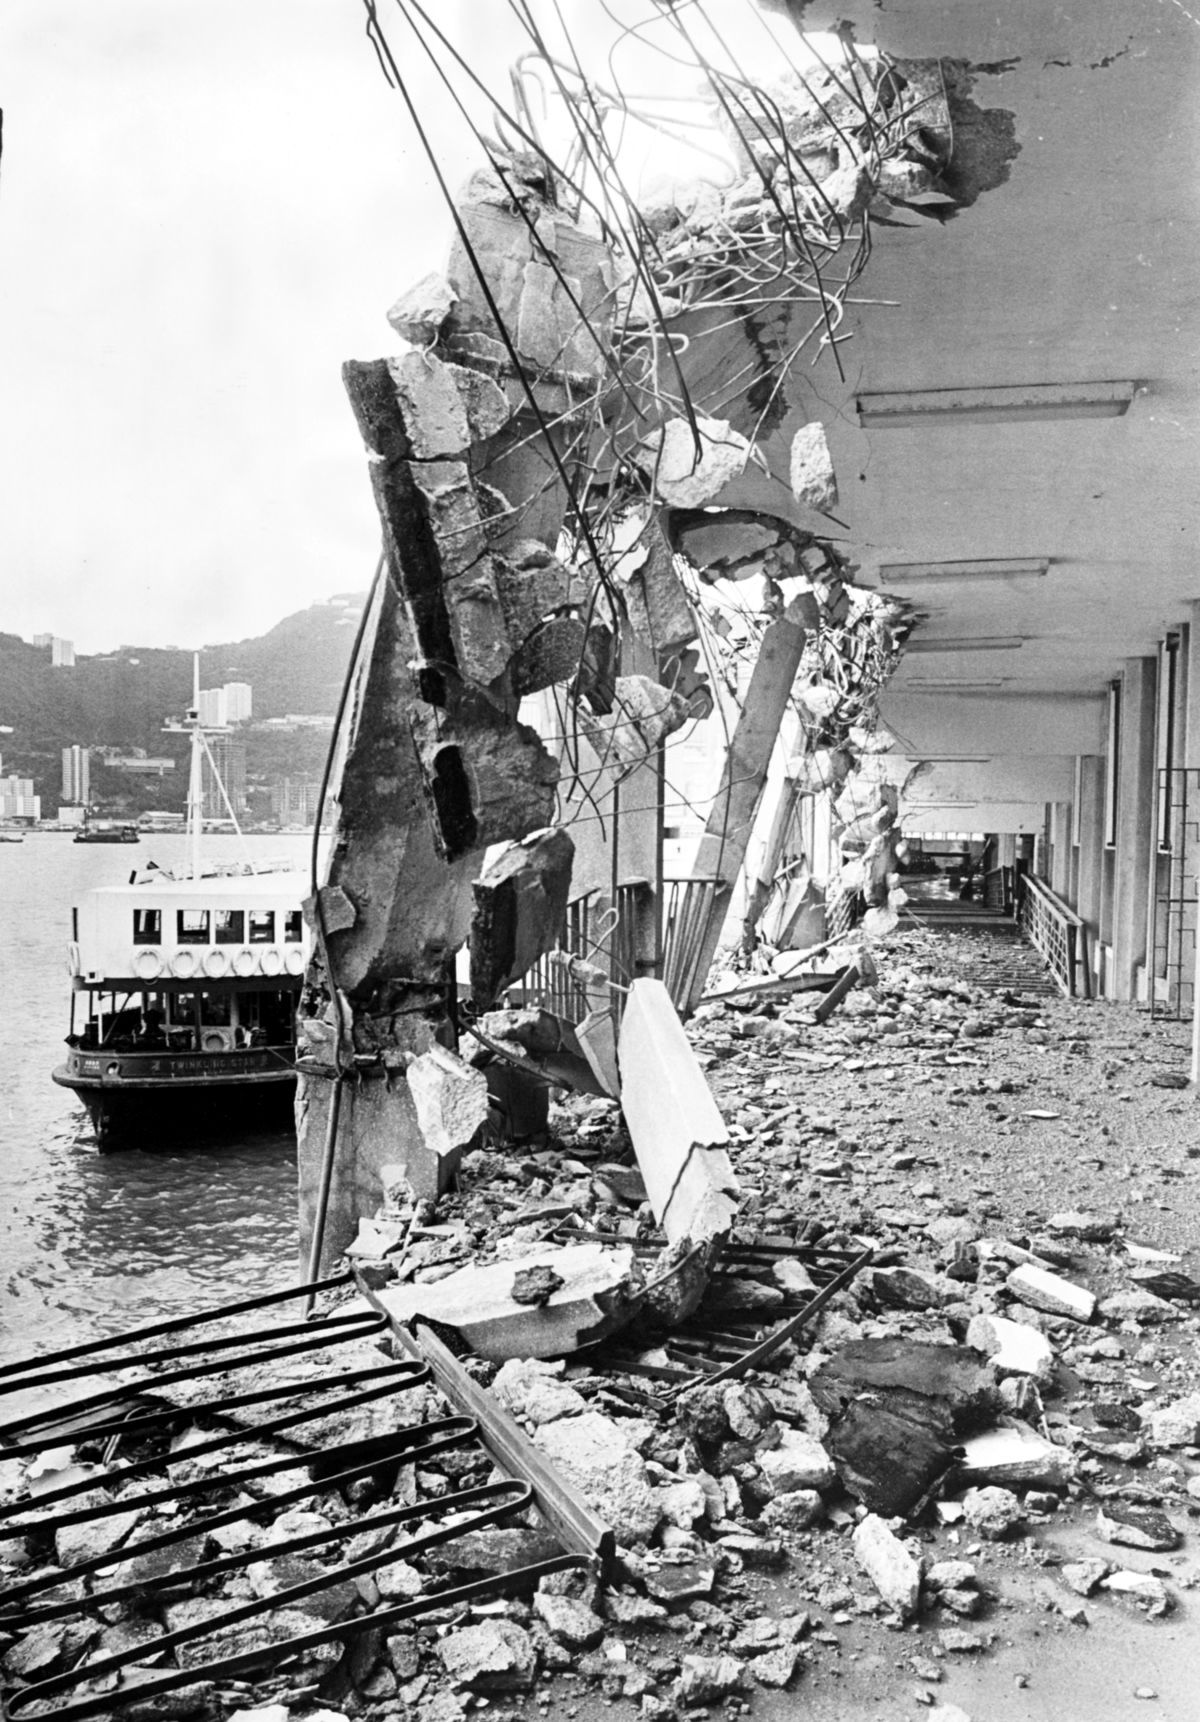 The Star Ferry Pier at Tsim Sha Tsui is left in ruins after being repeatedly battered by the Greek freighter Argonaut during Typhoon Hope